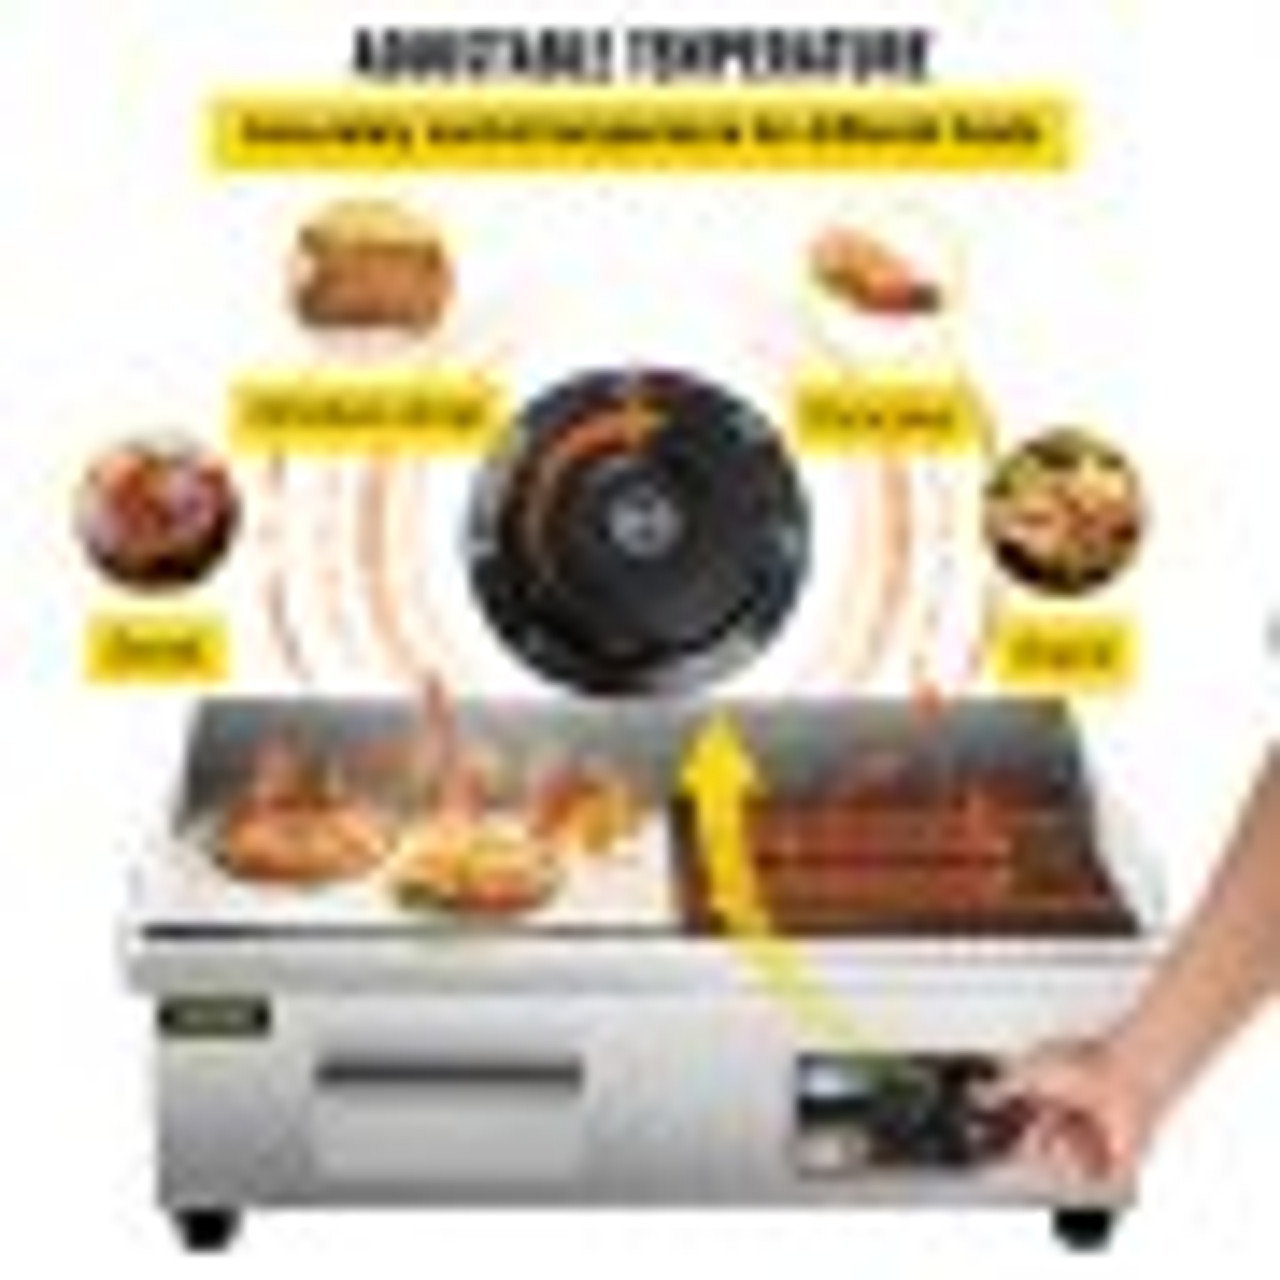 22" Commercial Electric Griddle, 1600W Electric Flat Top Grill, Half Grooved Teppanyaki Grill, Stainless Steel Electric Countertop Griddle w/Drip Hole, 122øF-572øF Electric Griddle for Kitchen.